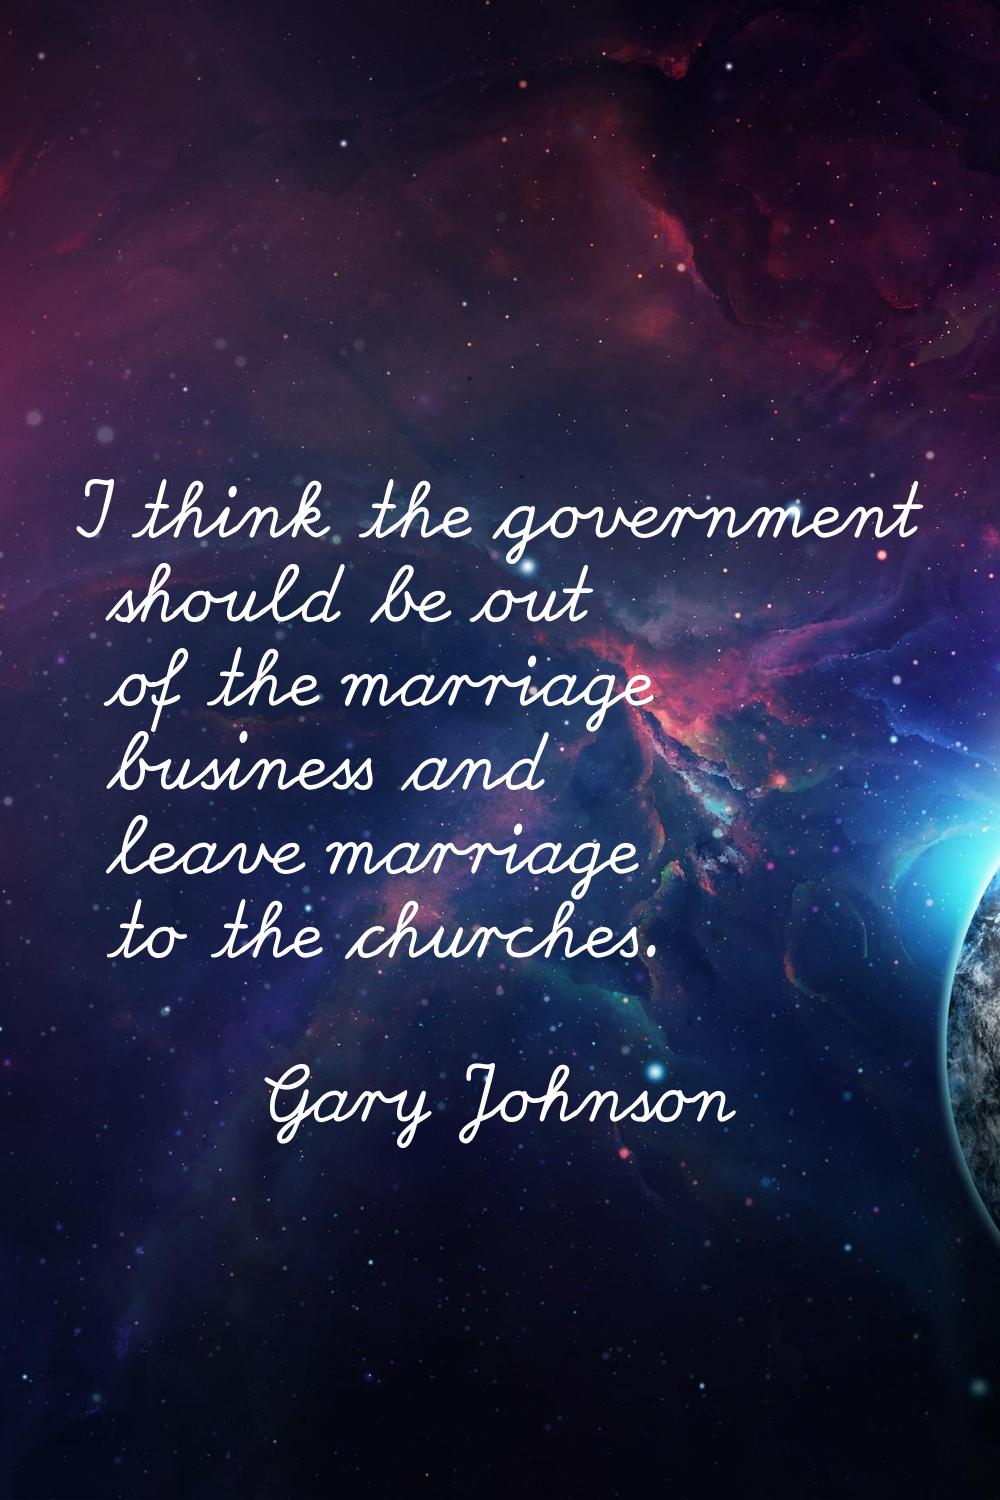 I think the government should be out of the marriage business and leave marriage to the churches.